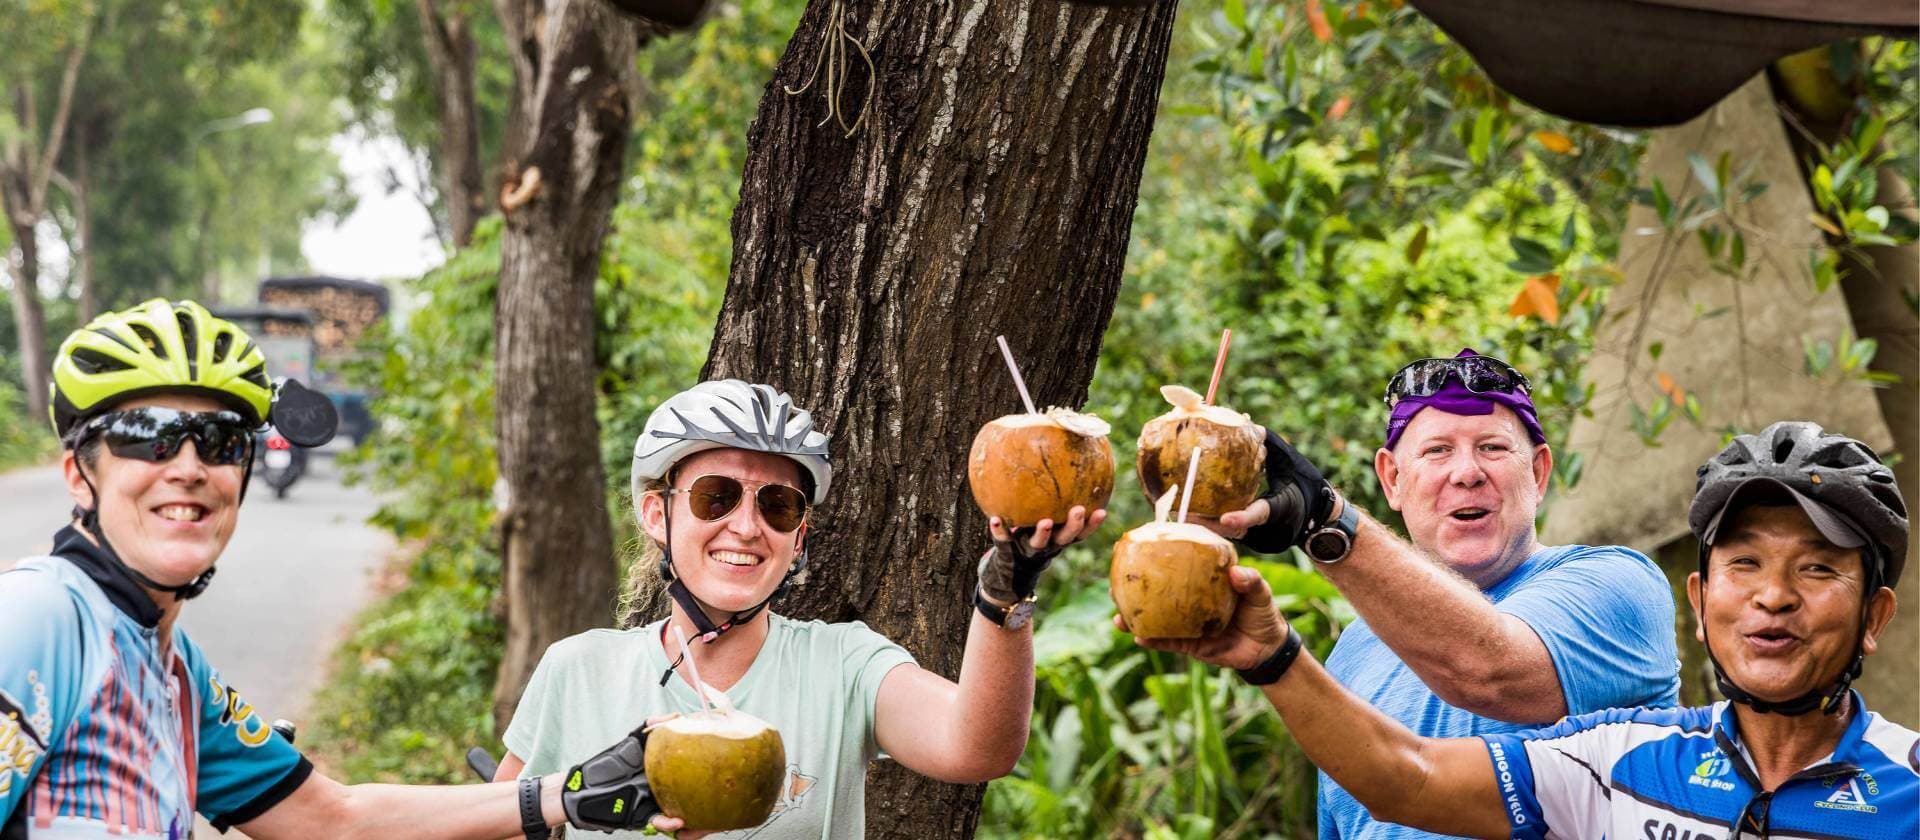 Tourists take a break with refreshment of drinking coconut water in the Mirissa to Galle Cycling tour Sri Lanka